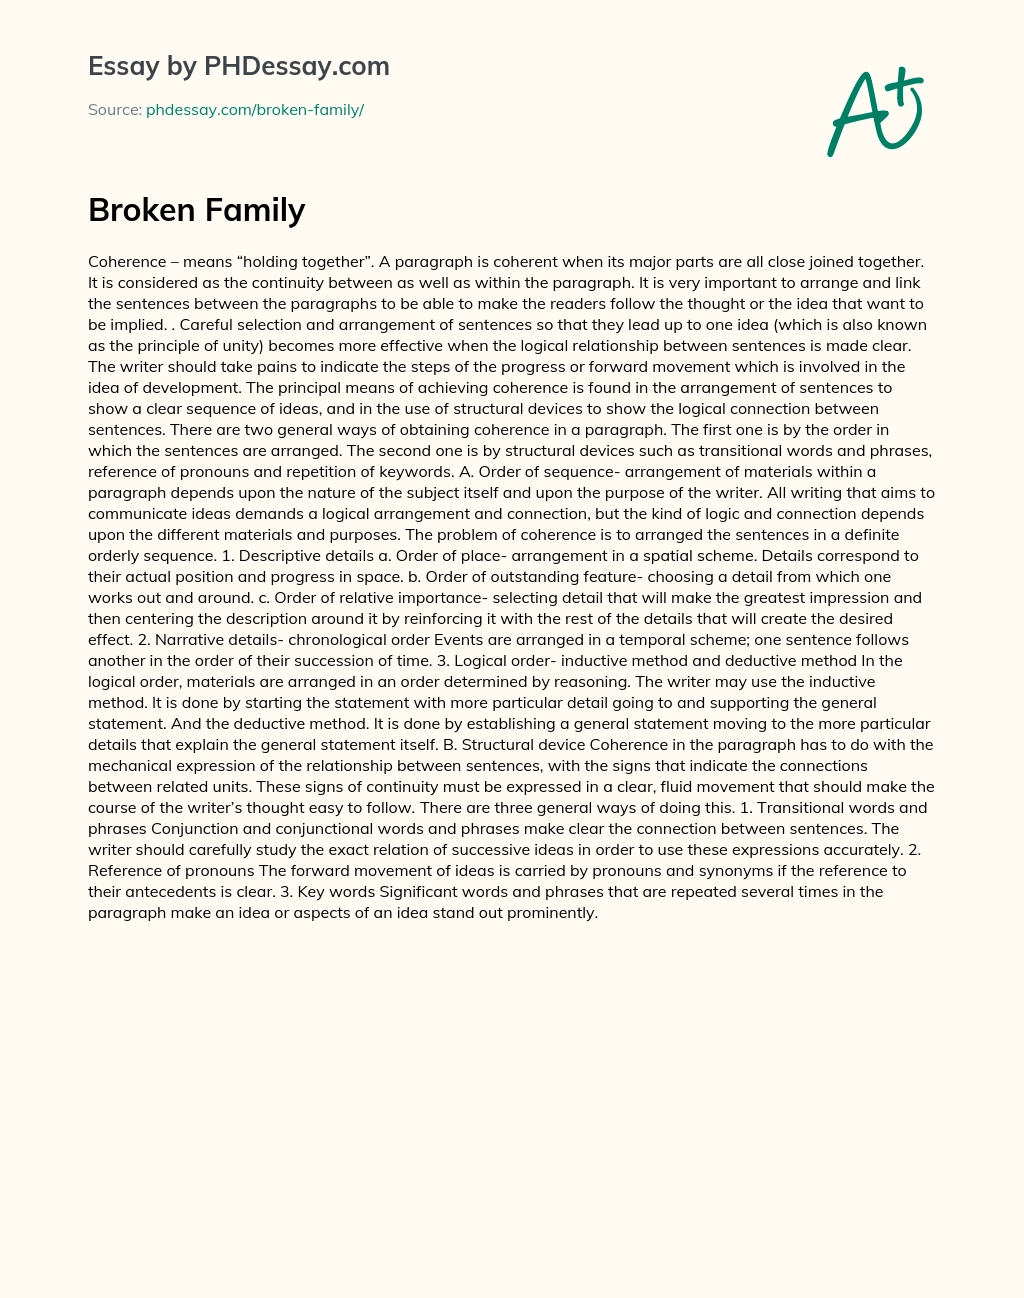 thesis about broken family